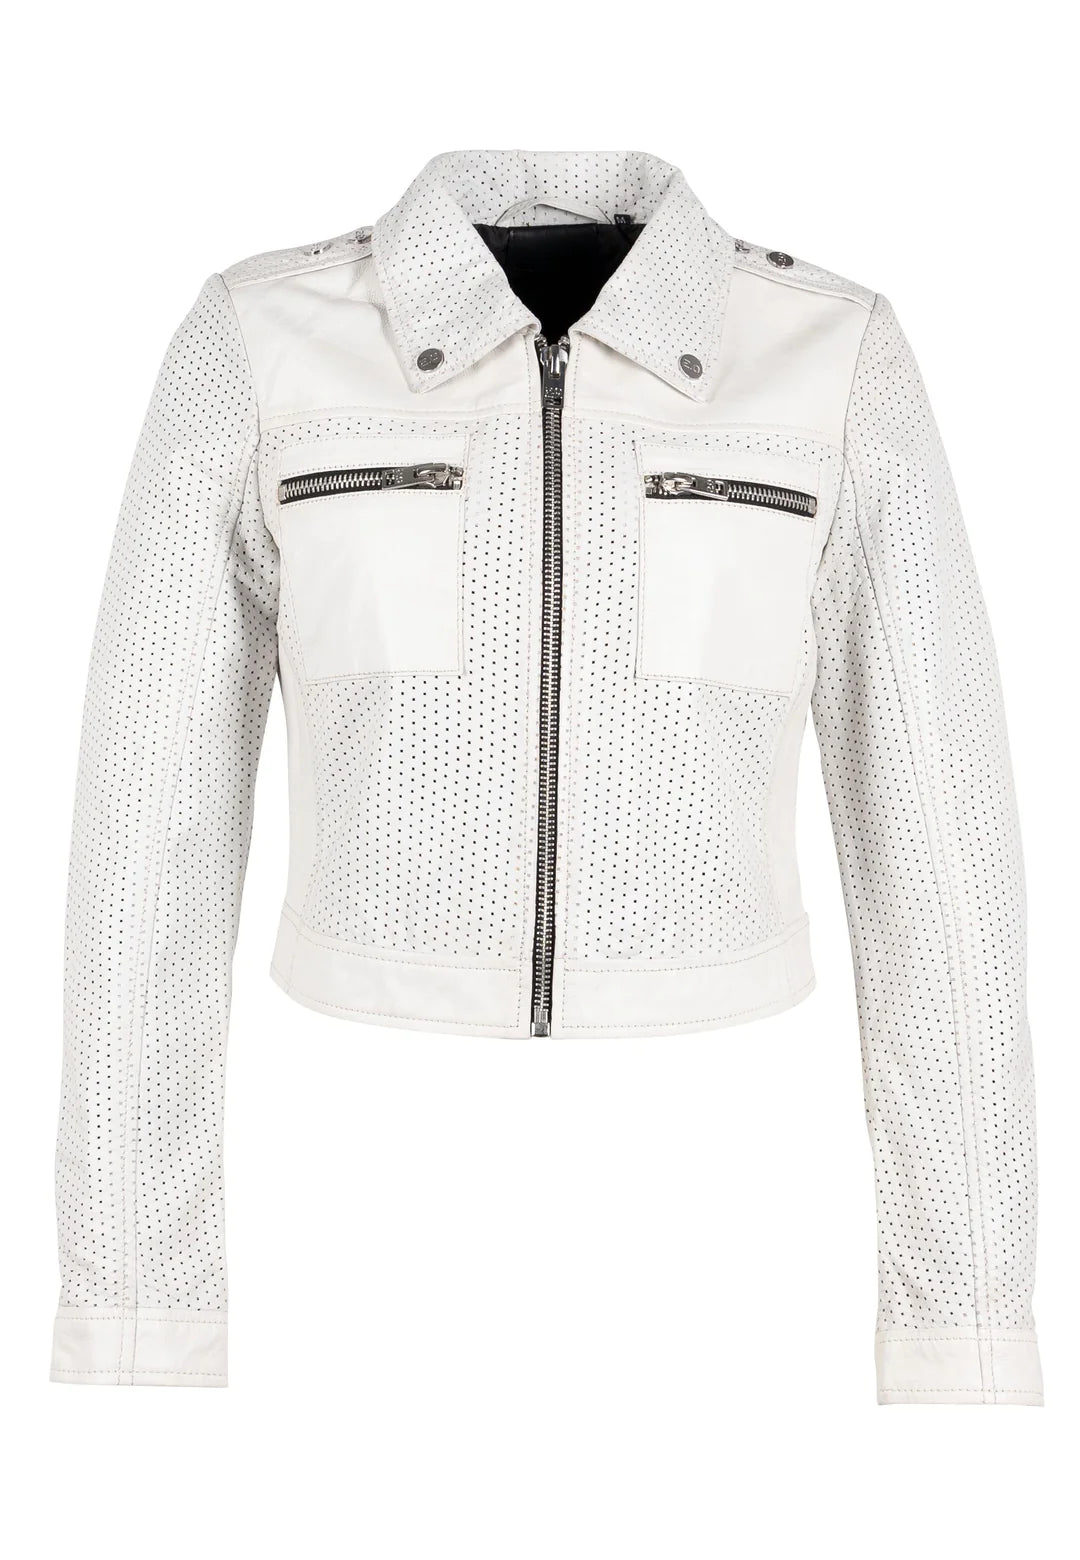 SHALA RF JACKET IN OFF WHITE - Romi Boutique